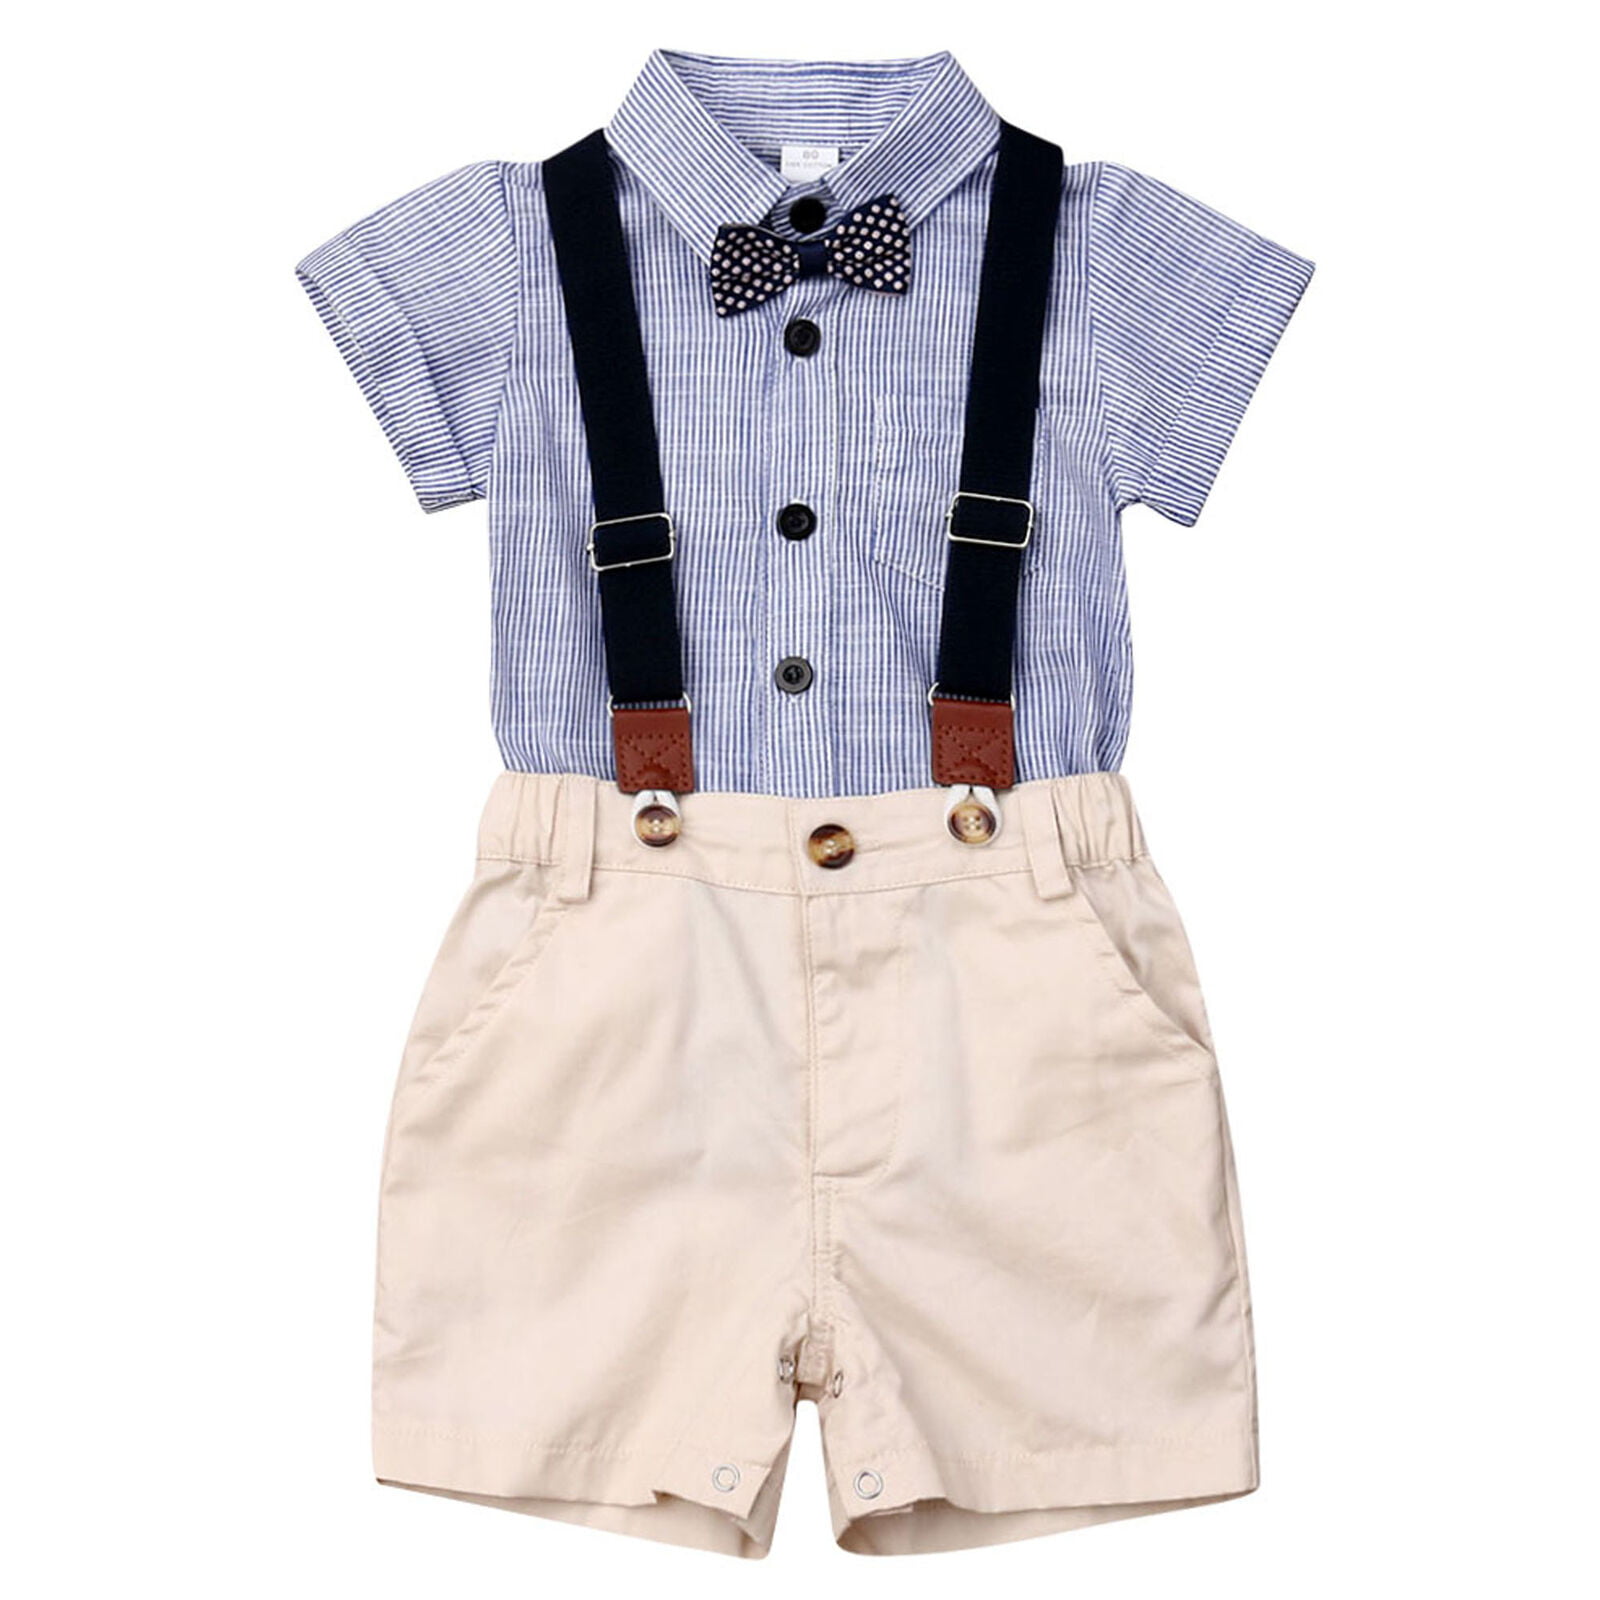 Baby Boys Gentleman Outfits Suits